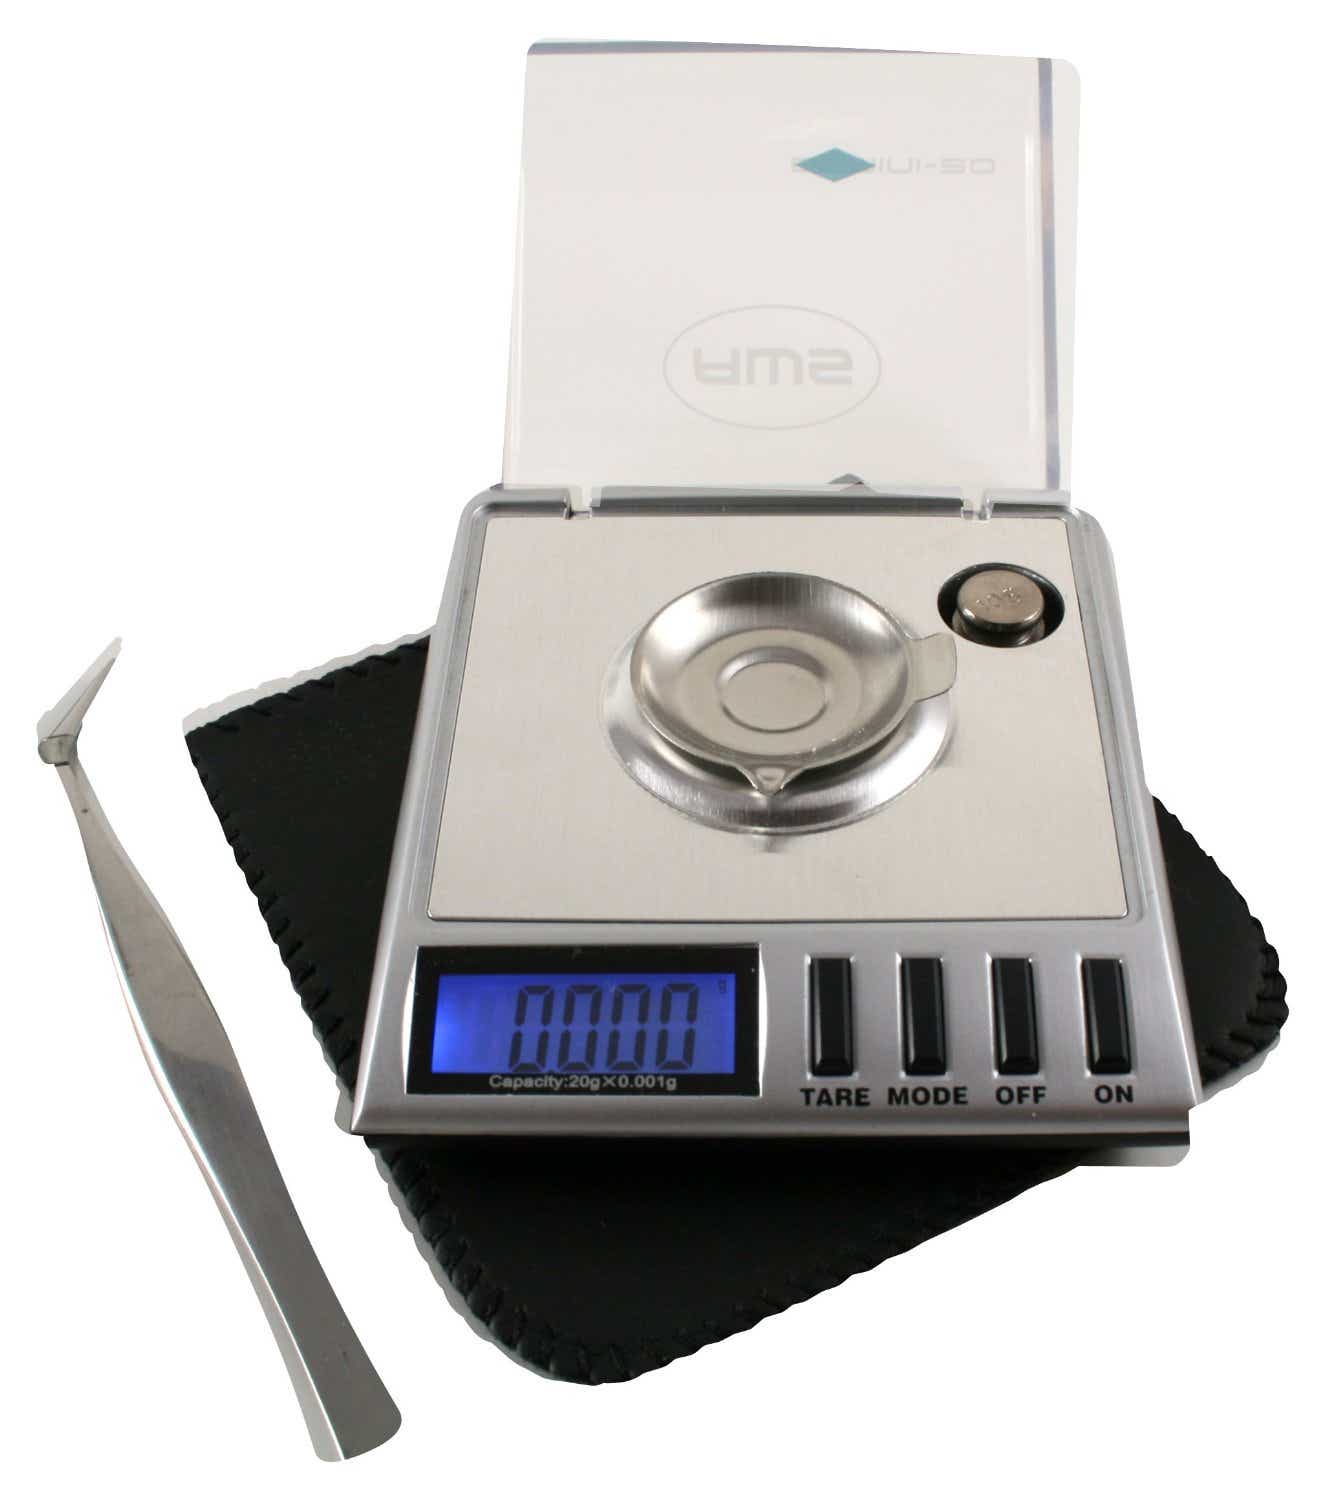 How Can You Weigh or Measure Your Cannabis Without a Scale?